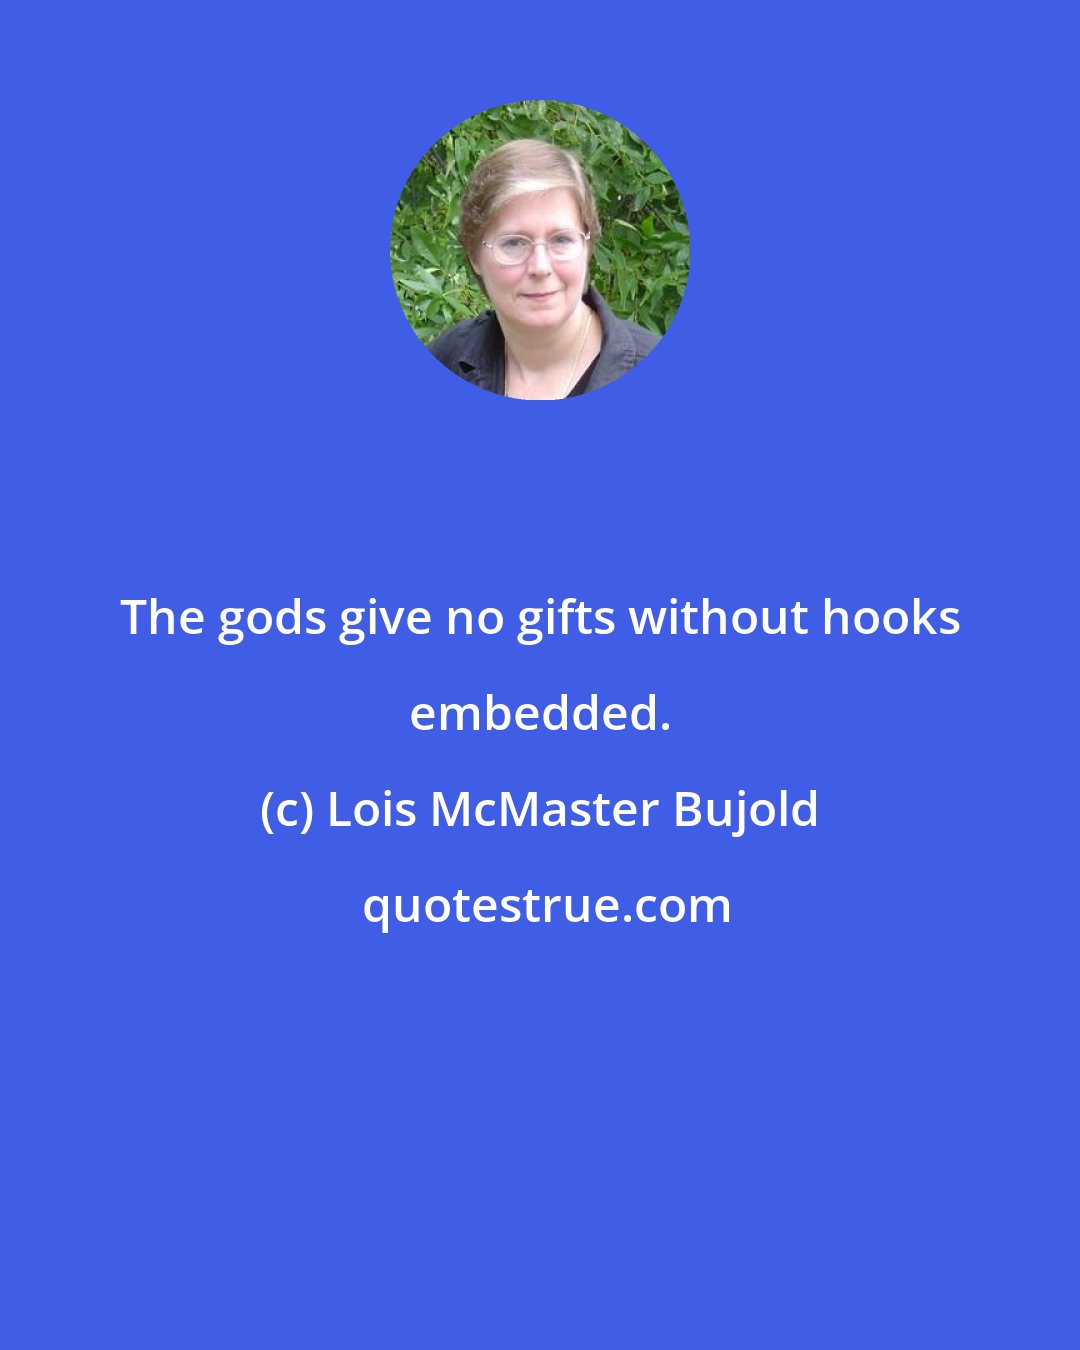 Lois McMaster Bujold: The gods give no gifts without hooks embedded.